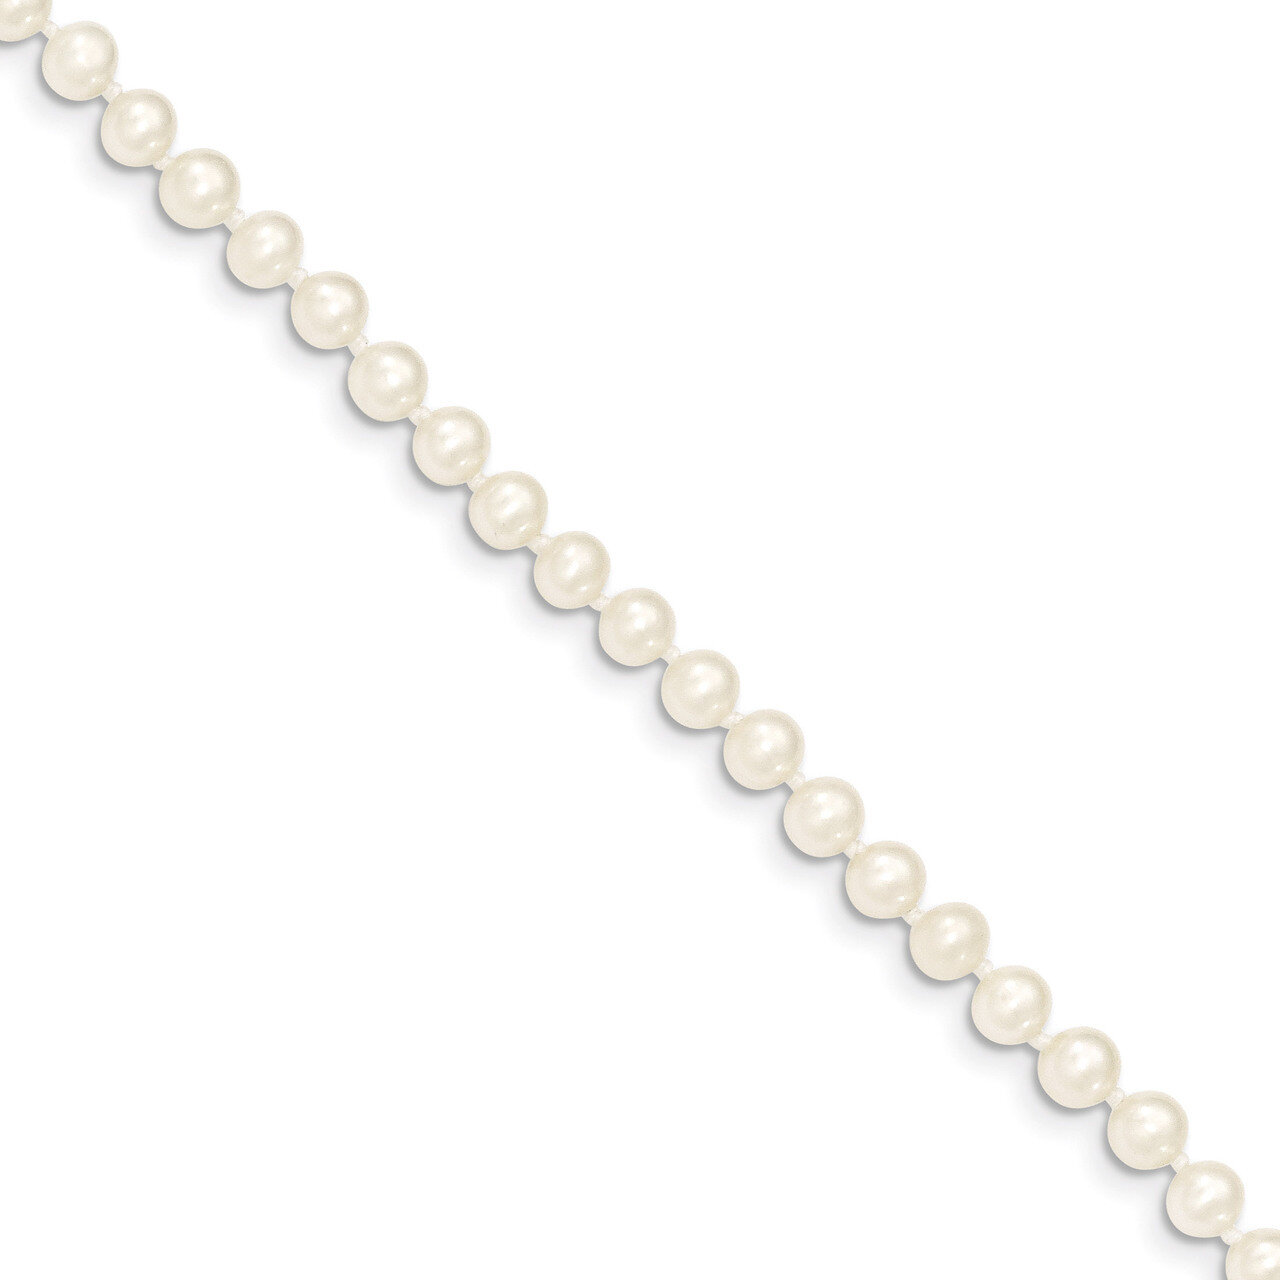 4-5mm White Cultured Near Round Pearl Necklace 24 Inch 14k Gold WPN040-24